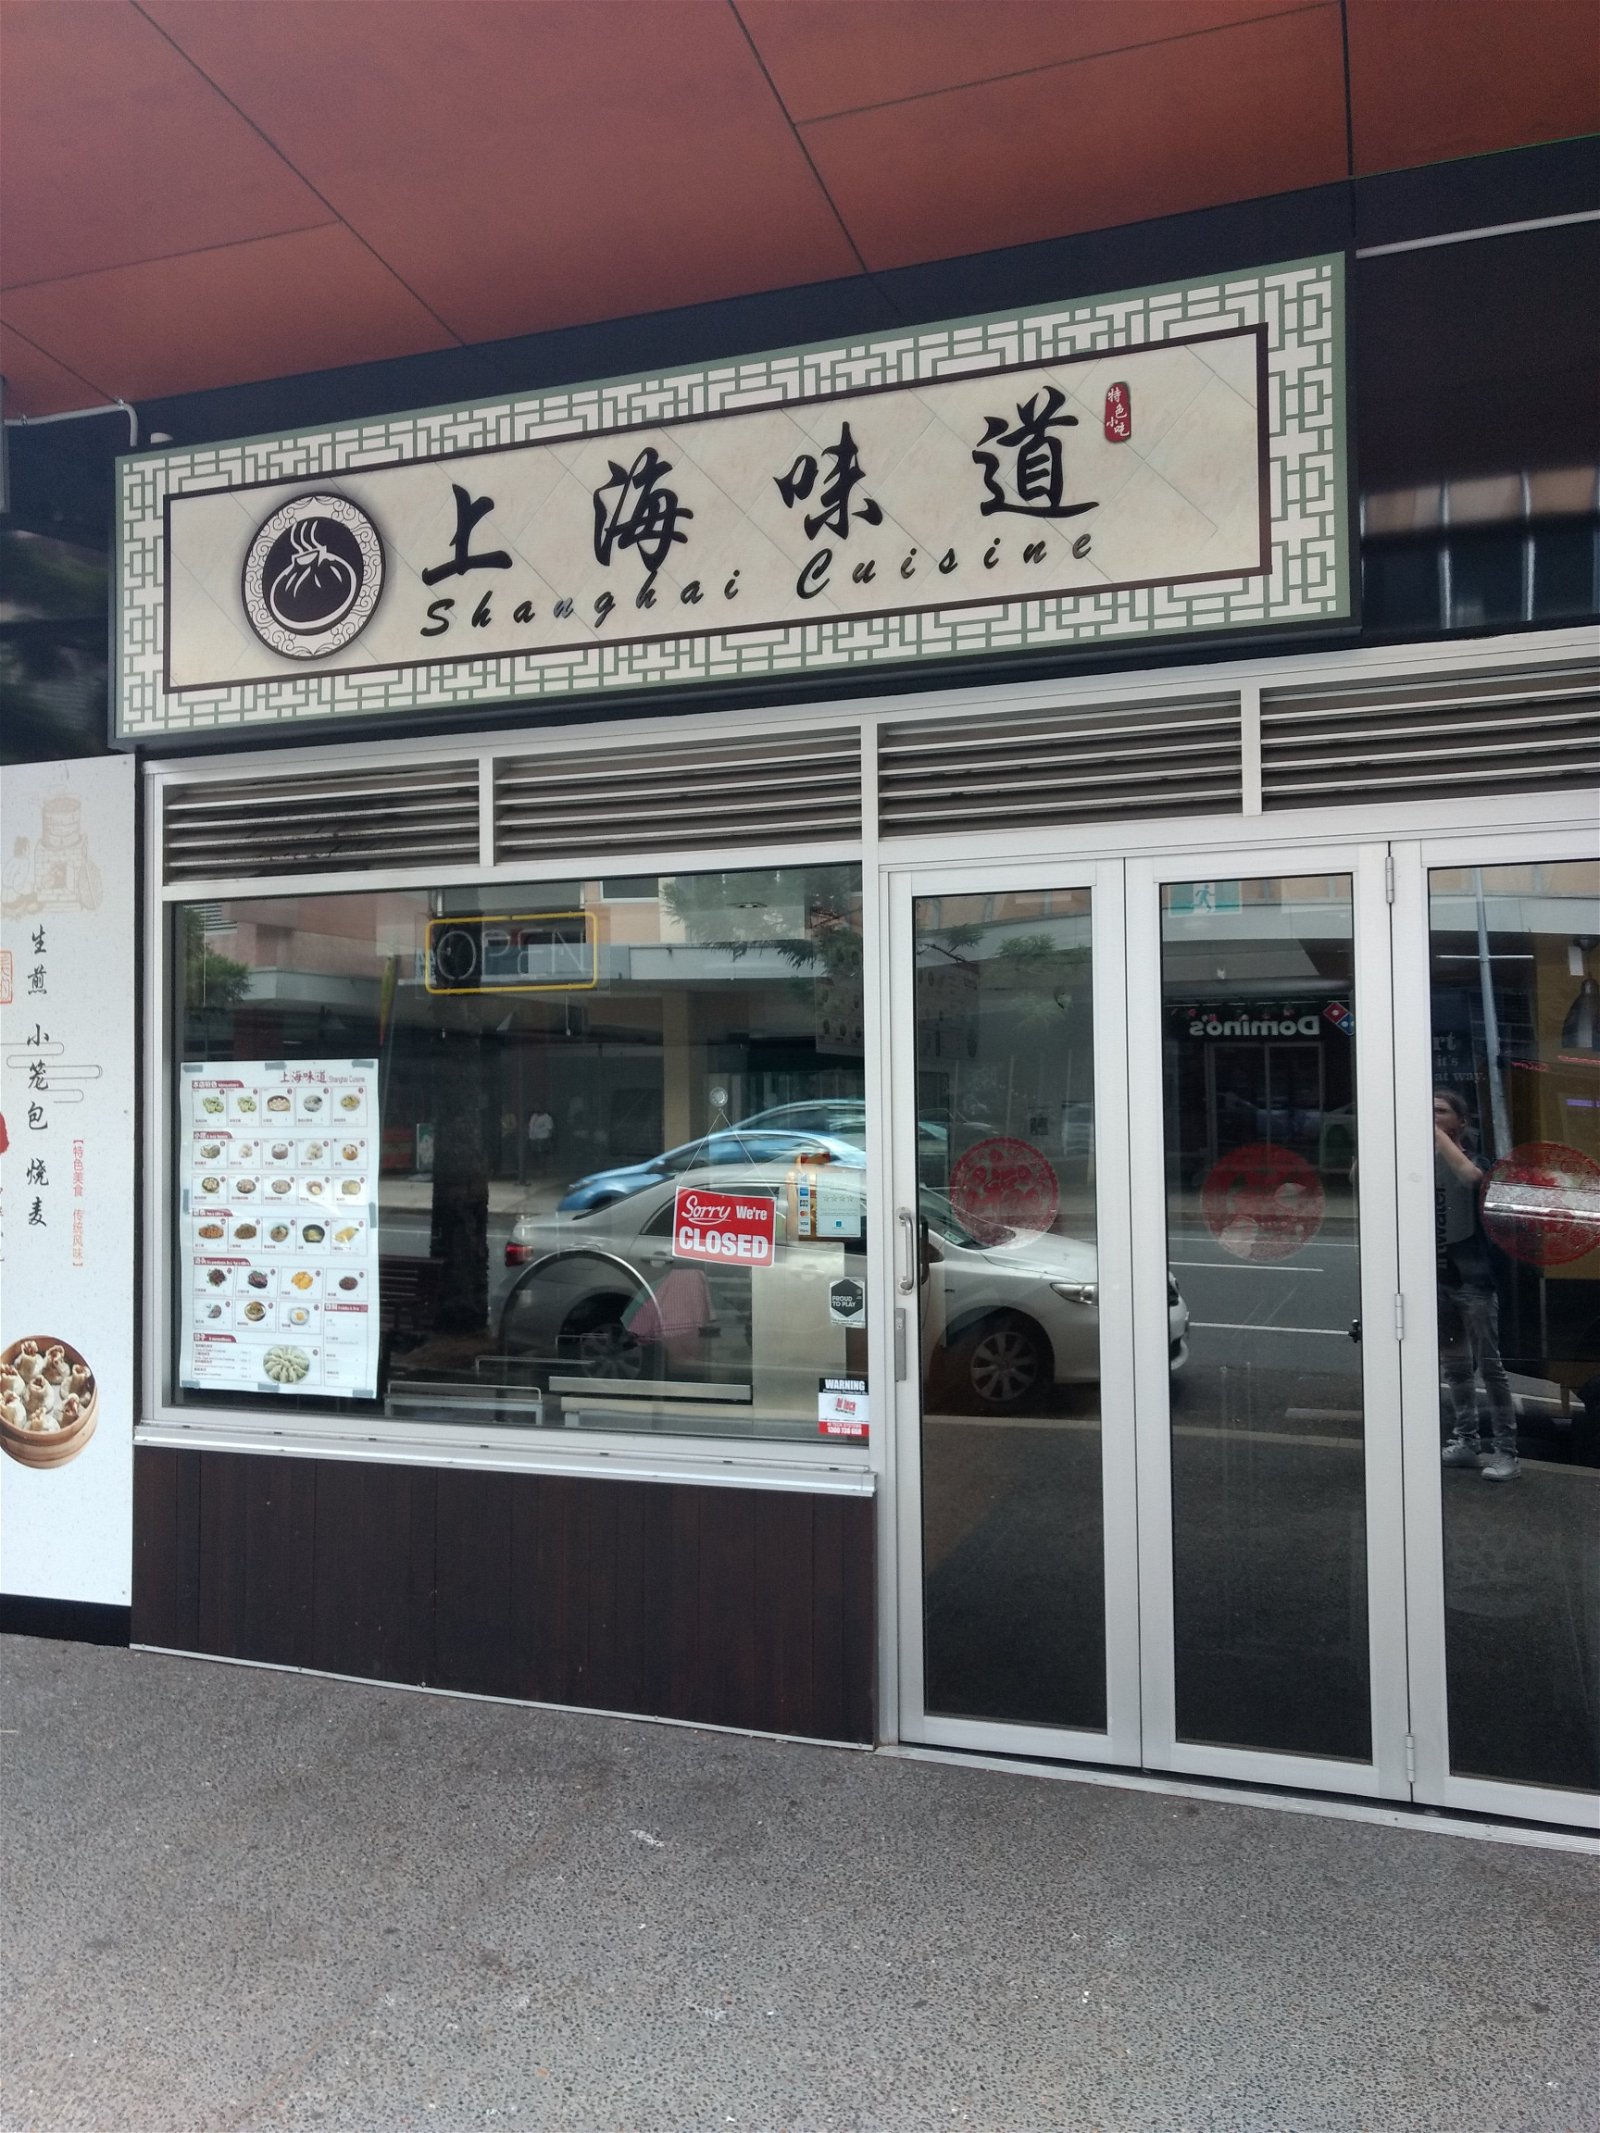 Shanghai Cuisine - Northern Rivers Accommodation